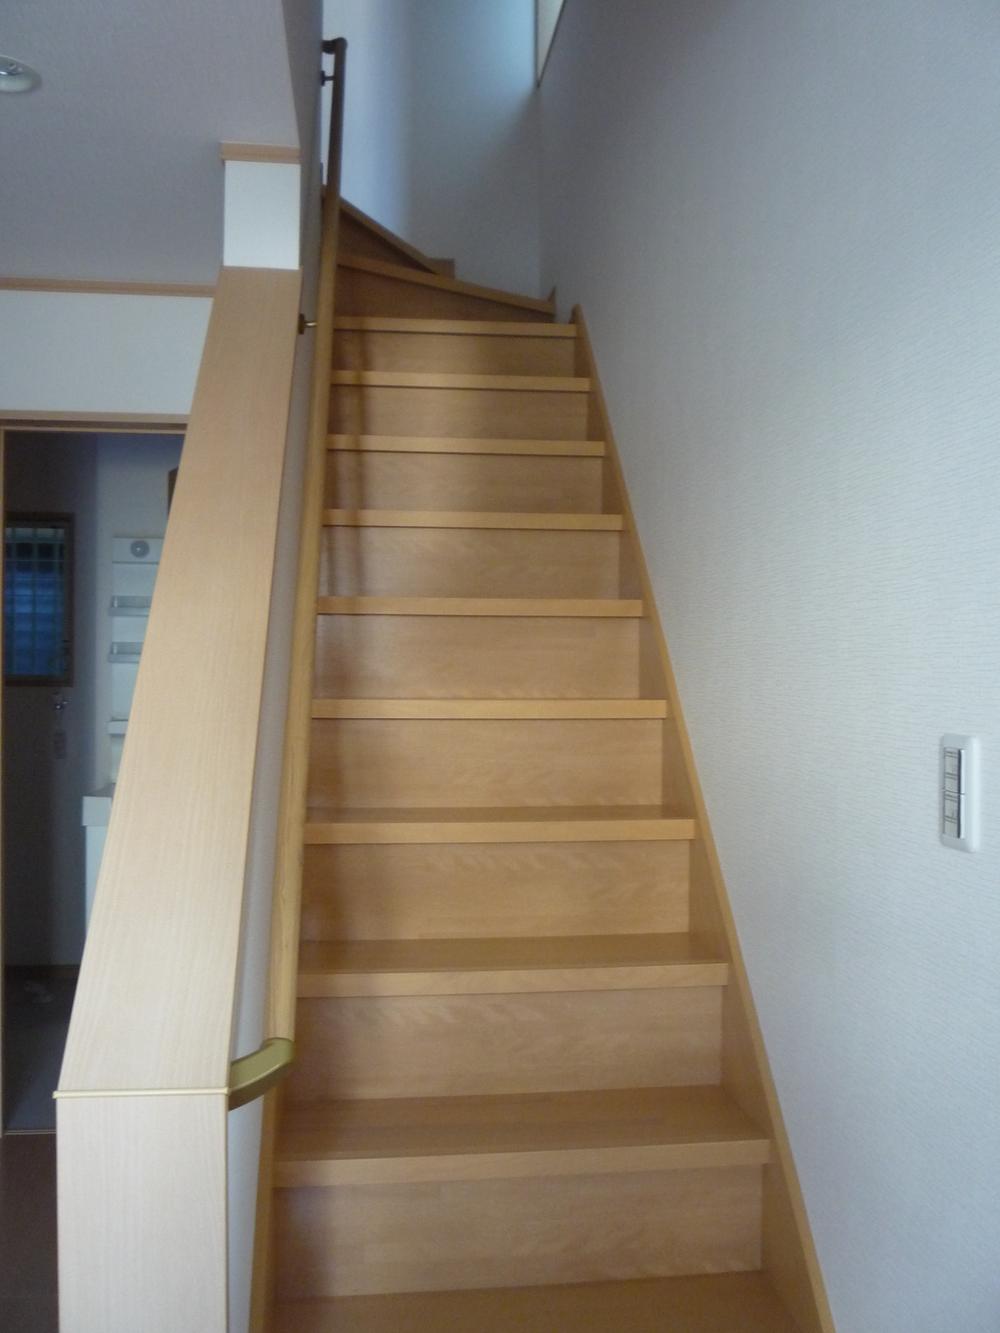 Same specifications photos (Other introspection). Stairs